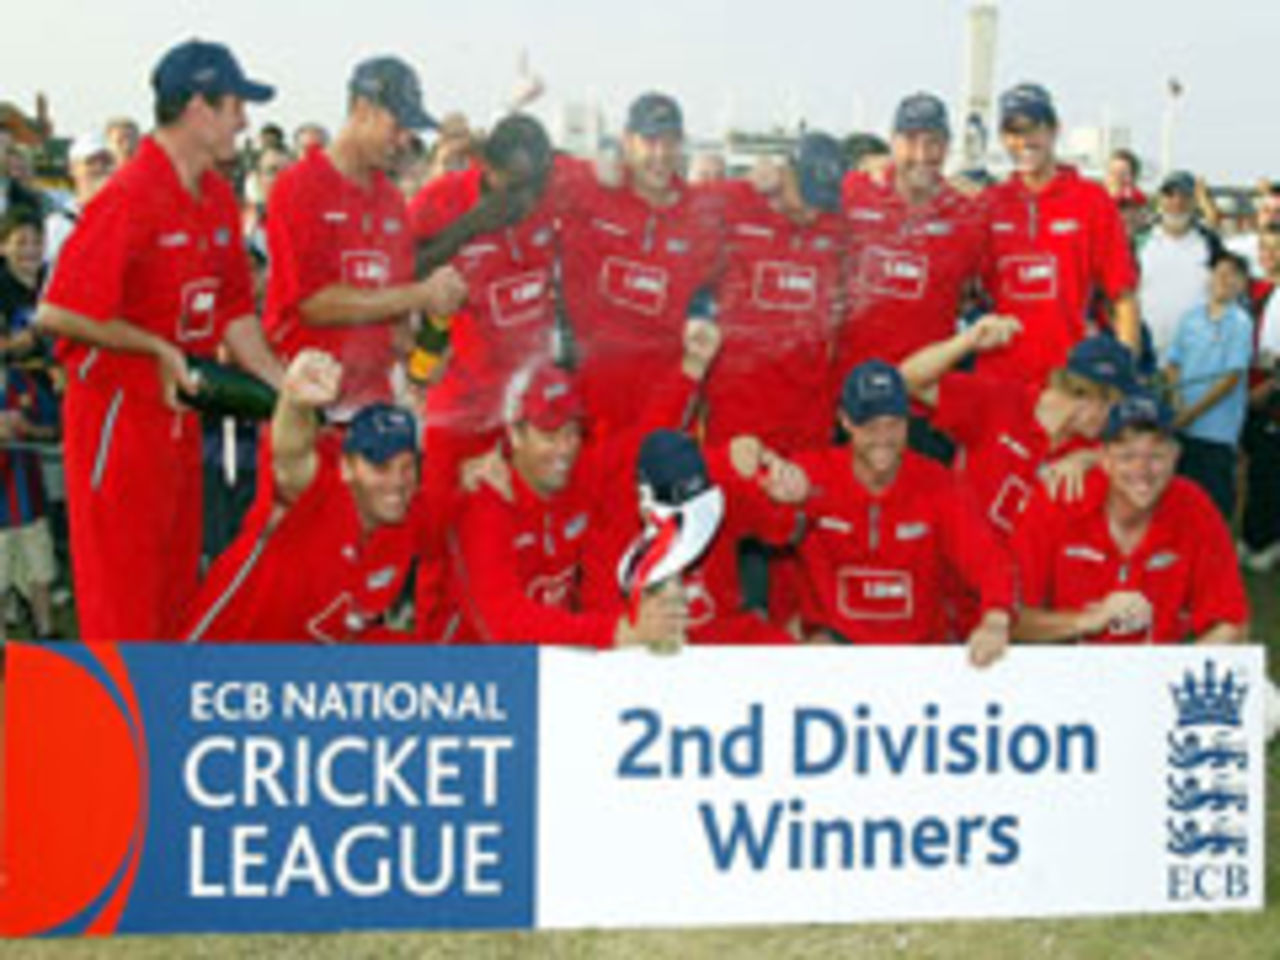 Lancashire team celebrate promotion to Div Two, v Northants, National League, Wantage Road, September 21, 2003